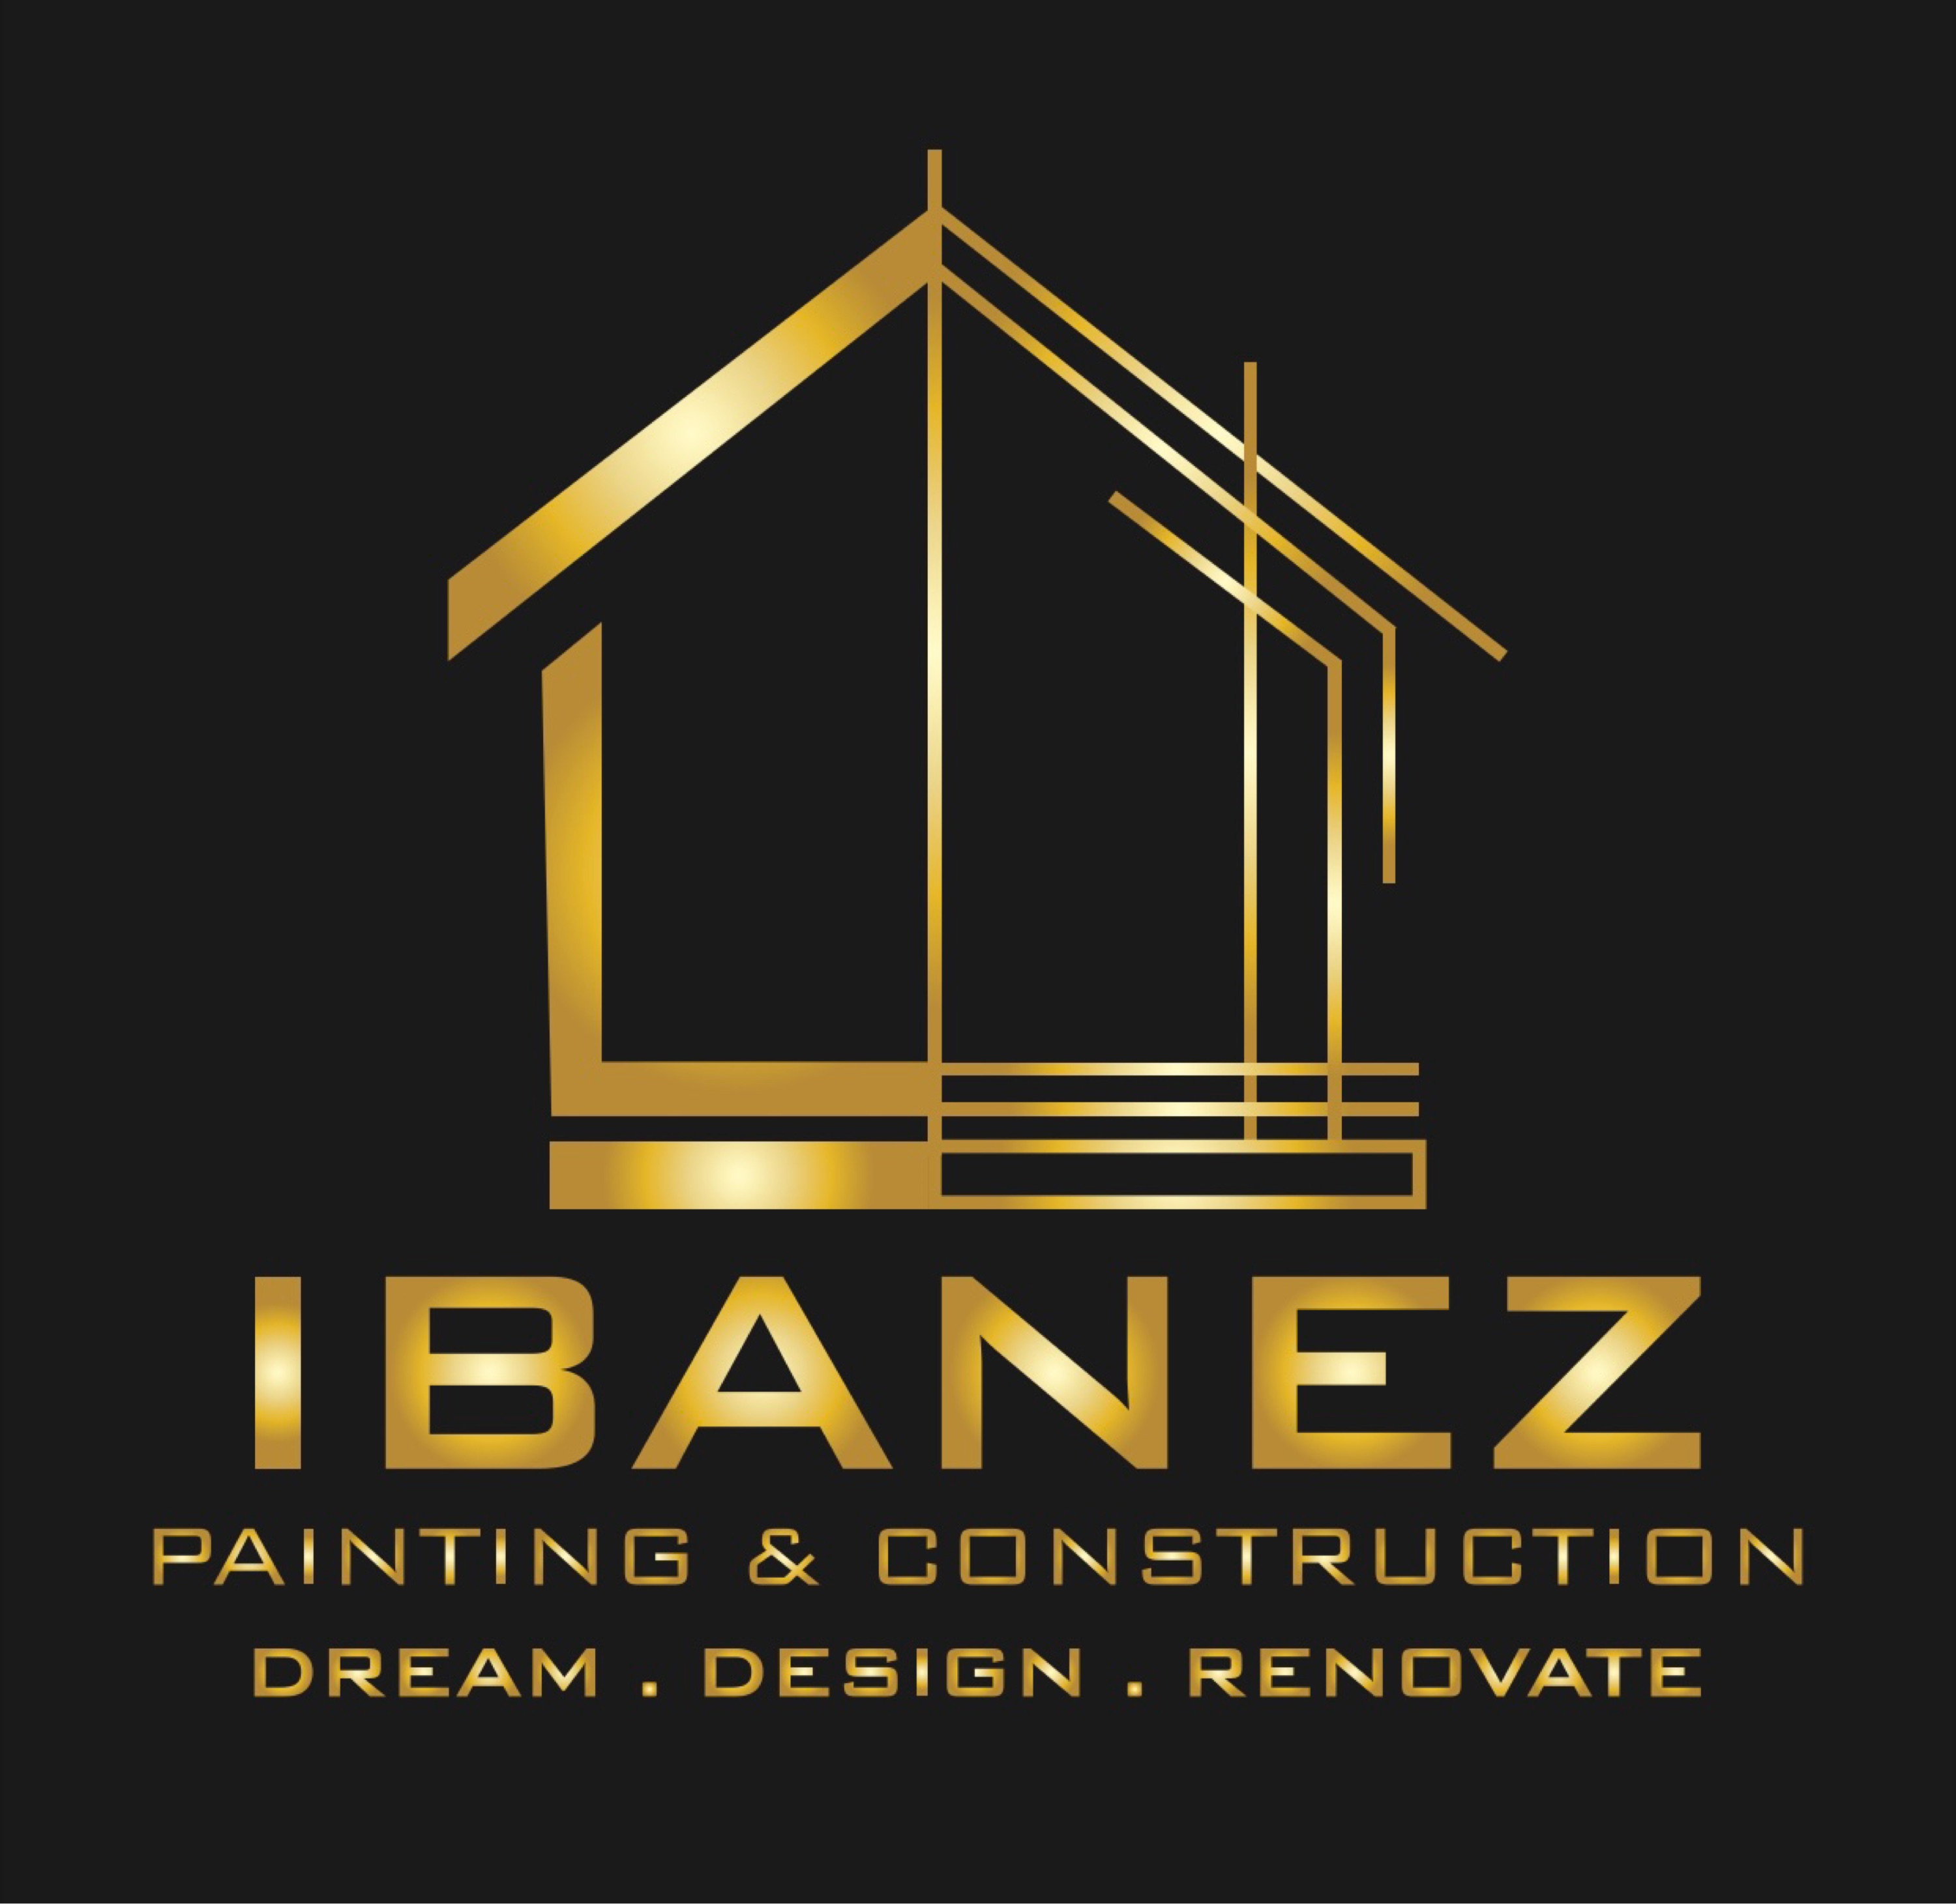 Ibanez Painting and Construction Logo